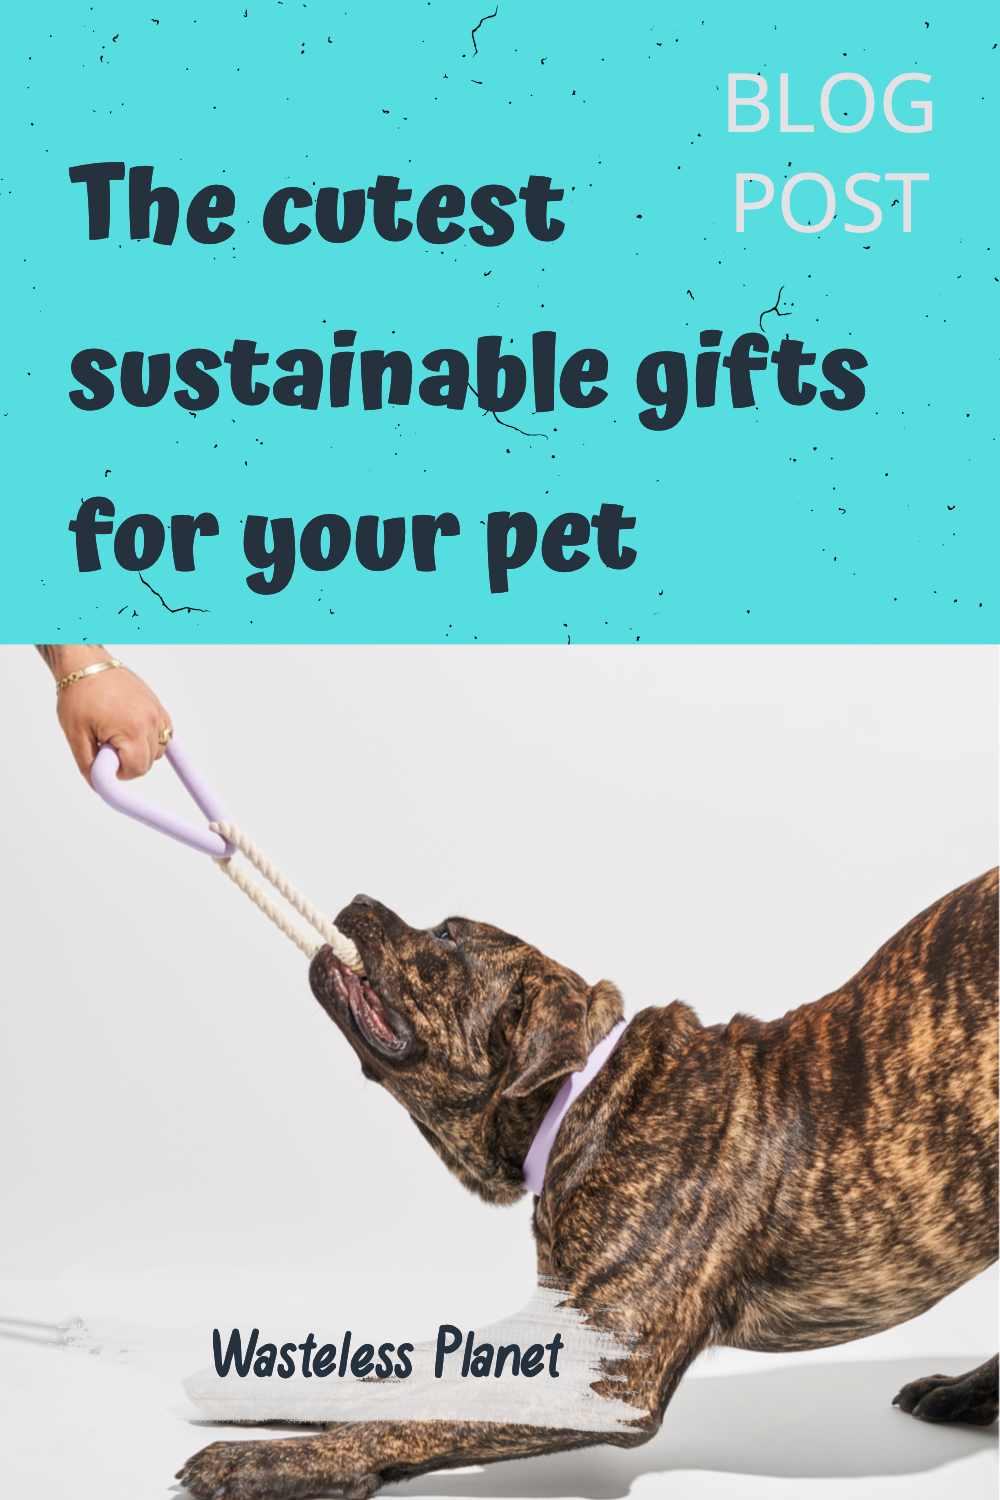 These are the cutest sustainable gifts for your pet (cats and dogs)